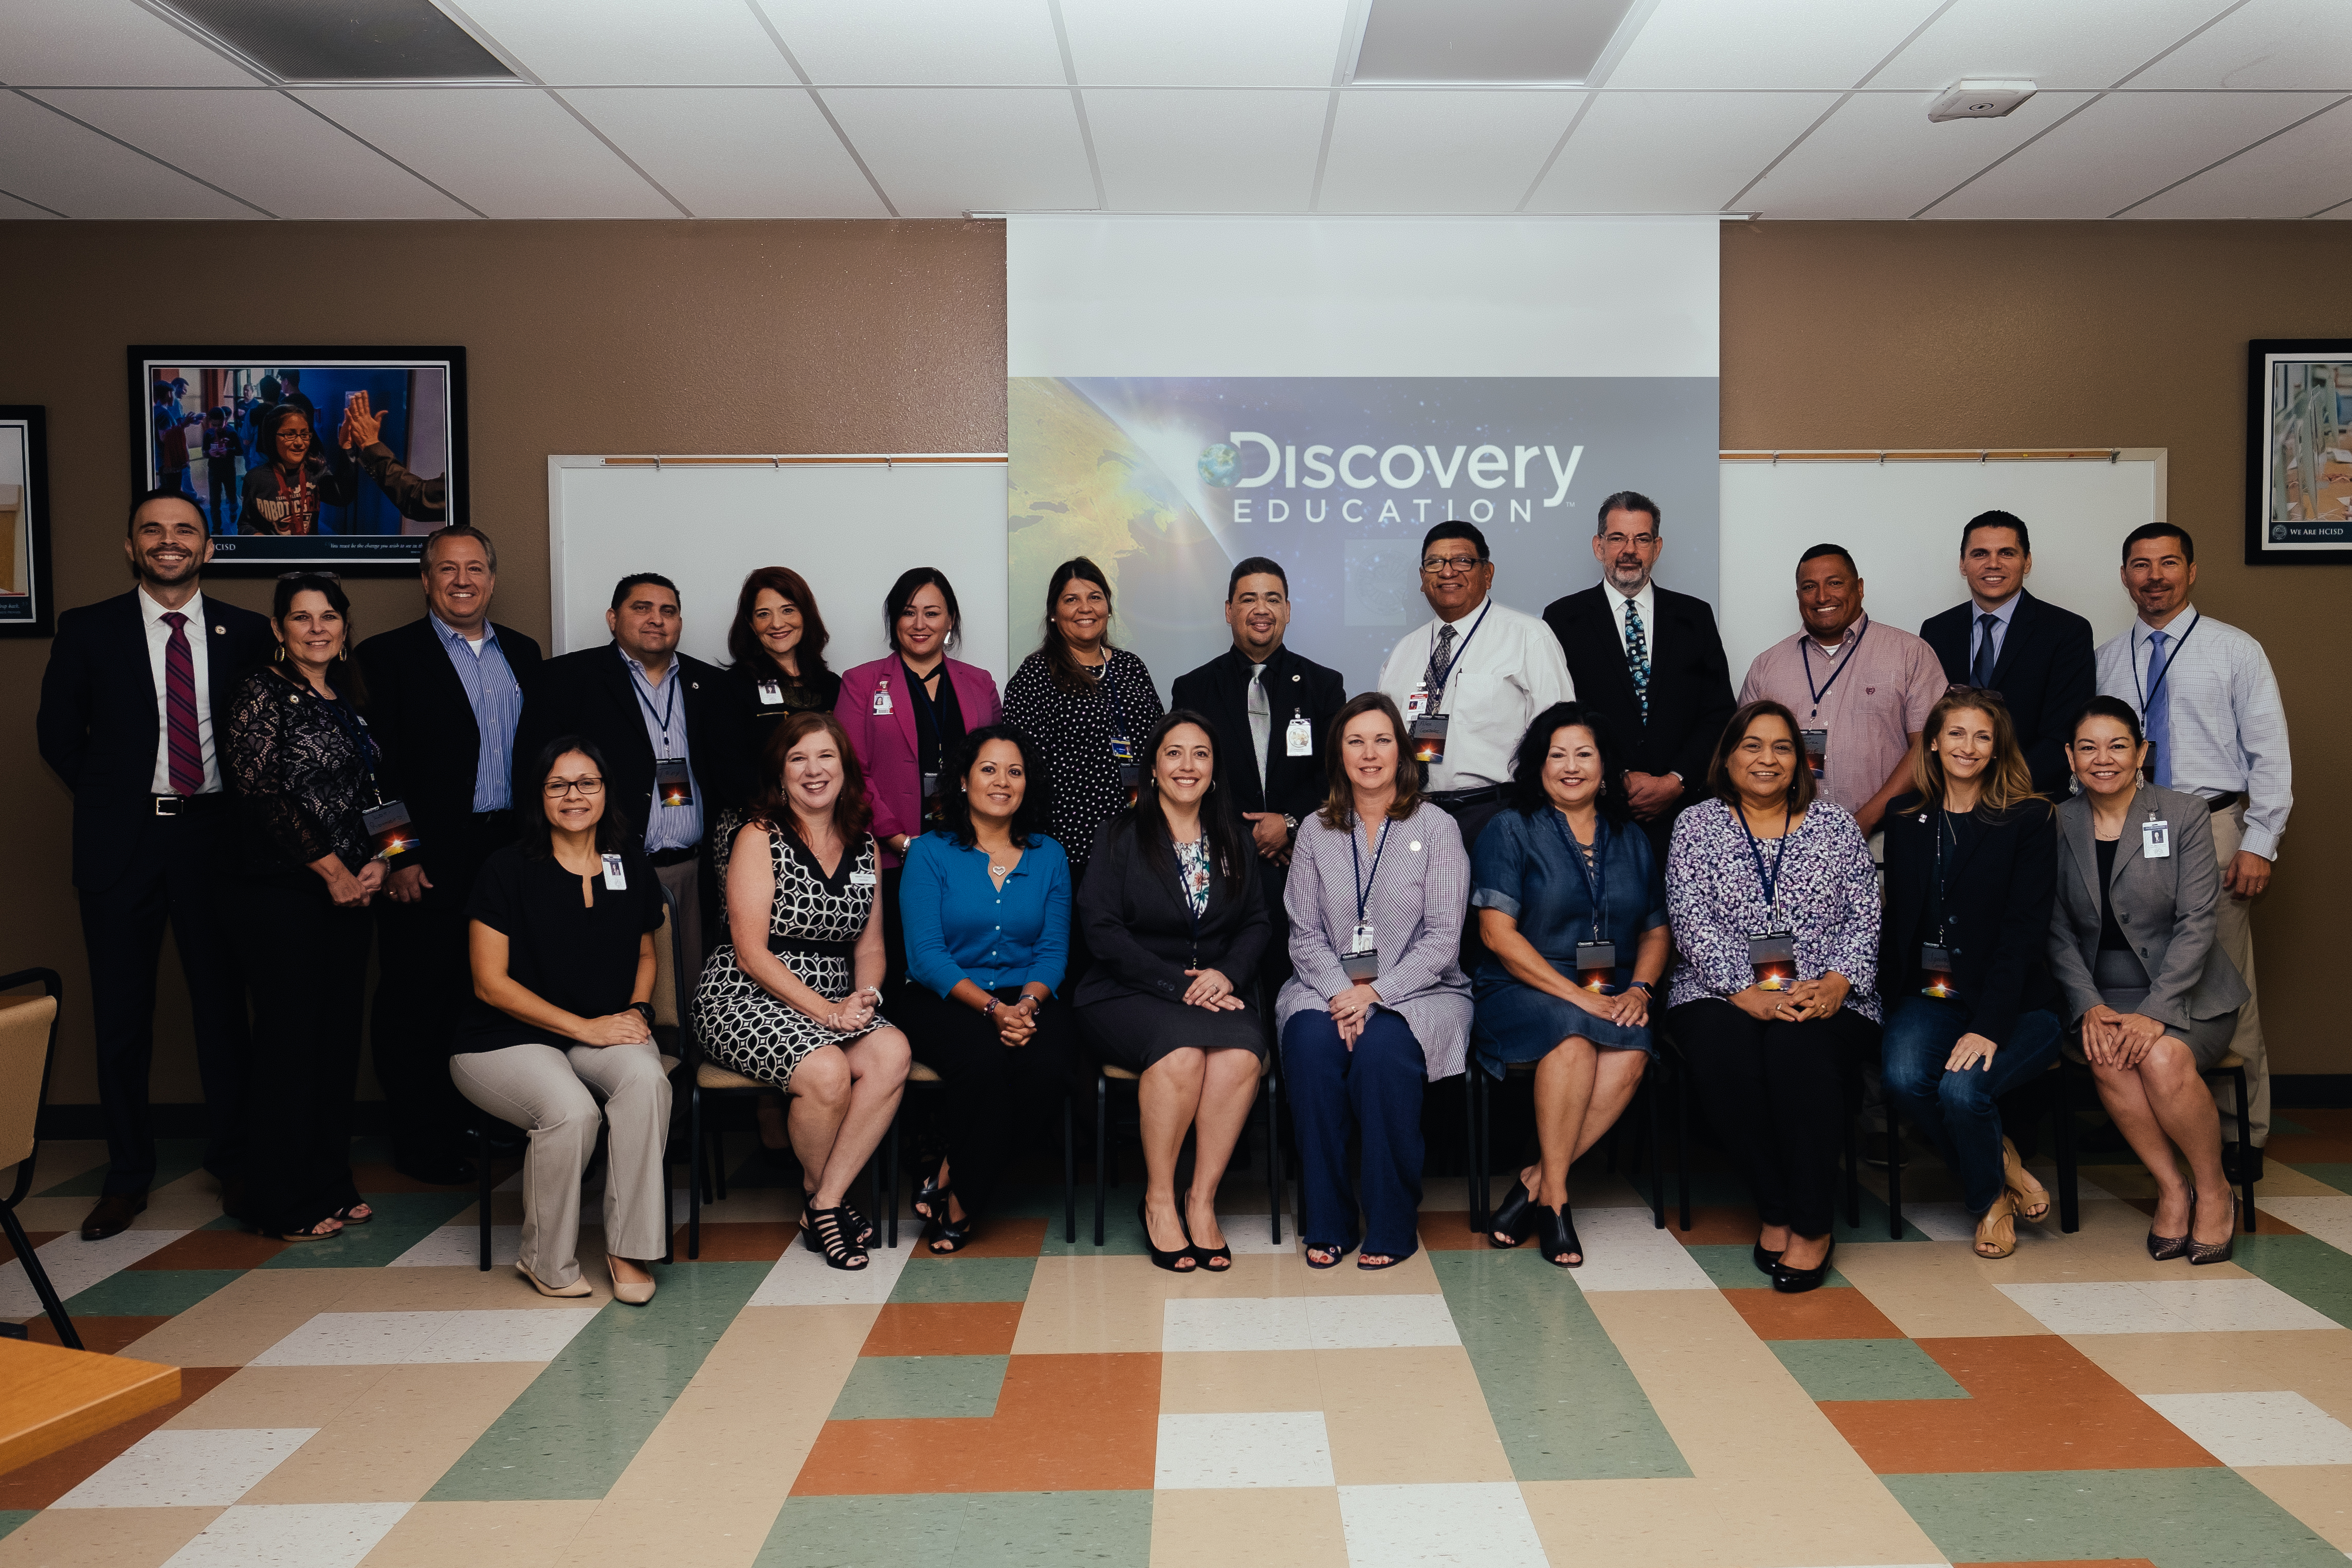 HCISD unveils new partnership with Discovery Education, engages community to develop shared vision for STEM